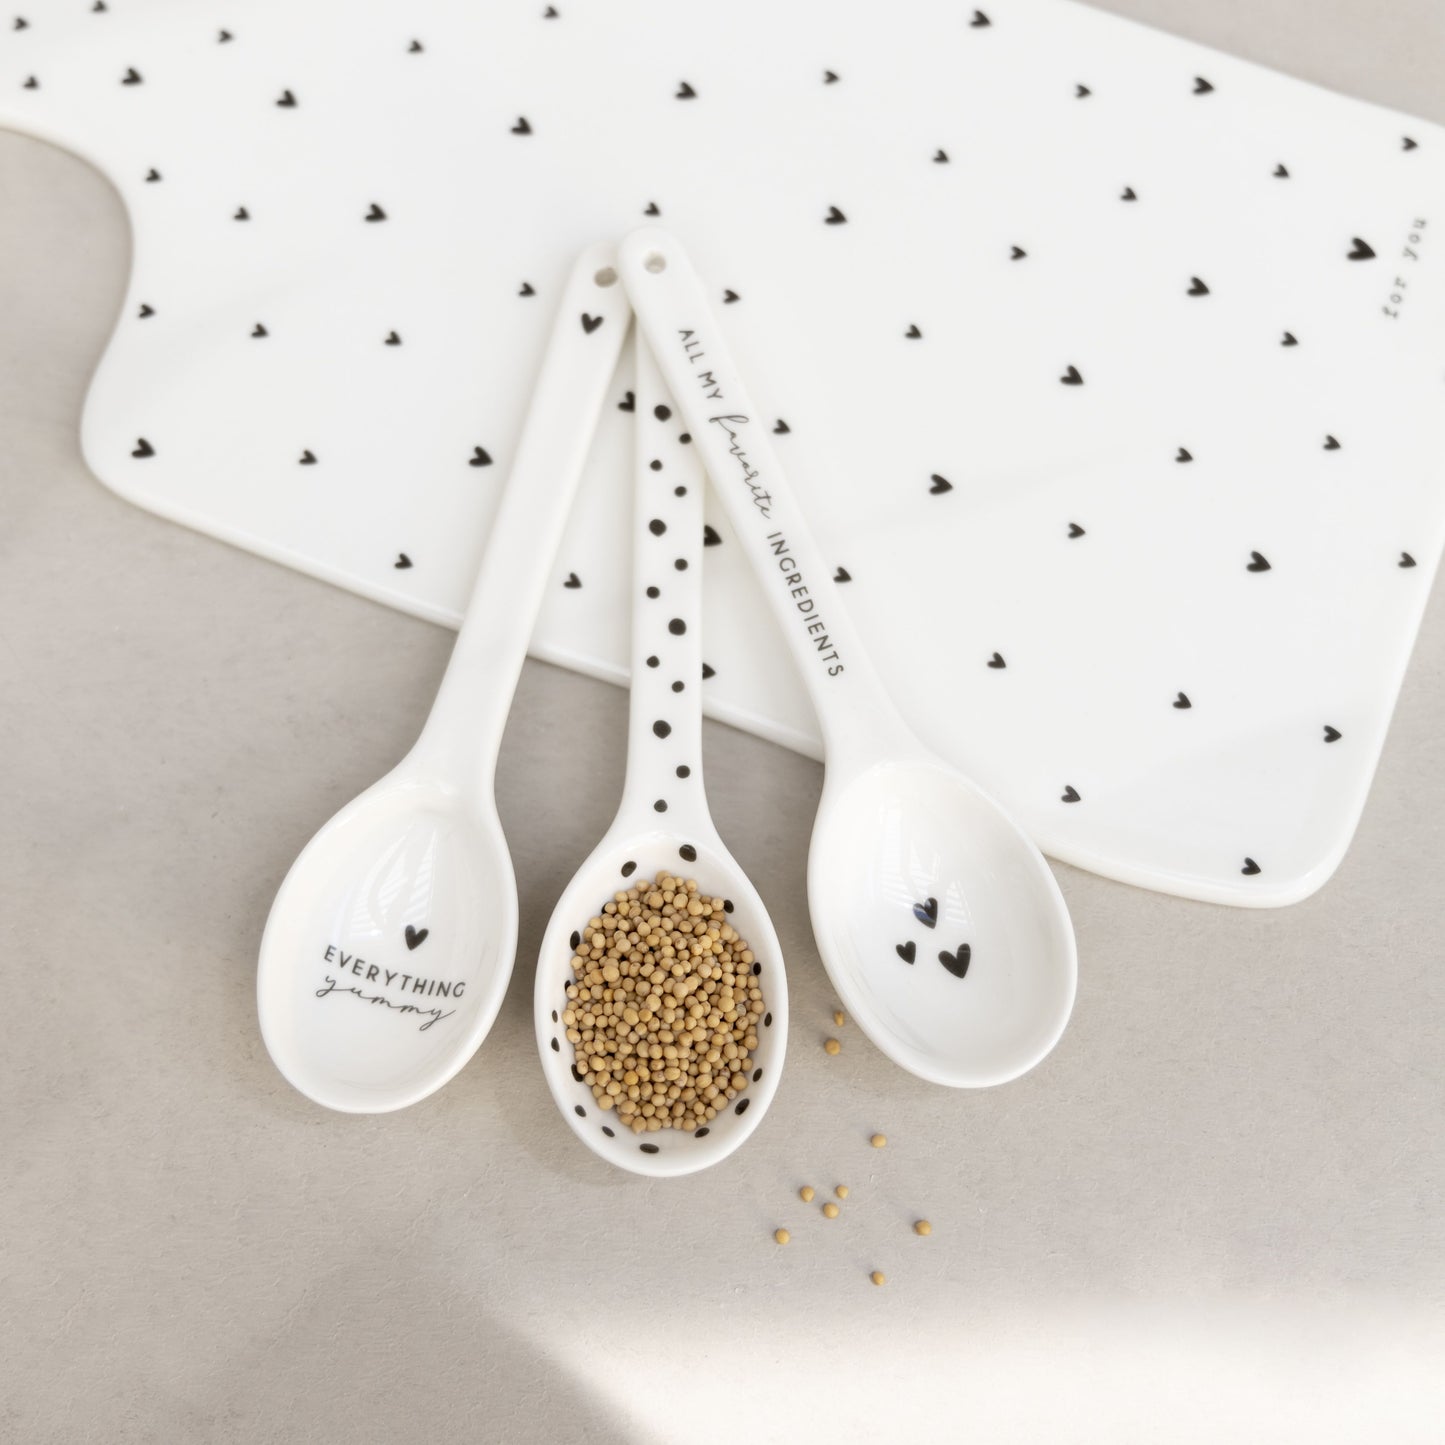 Bastion Collections Spoon / Löffel -dots-